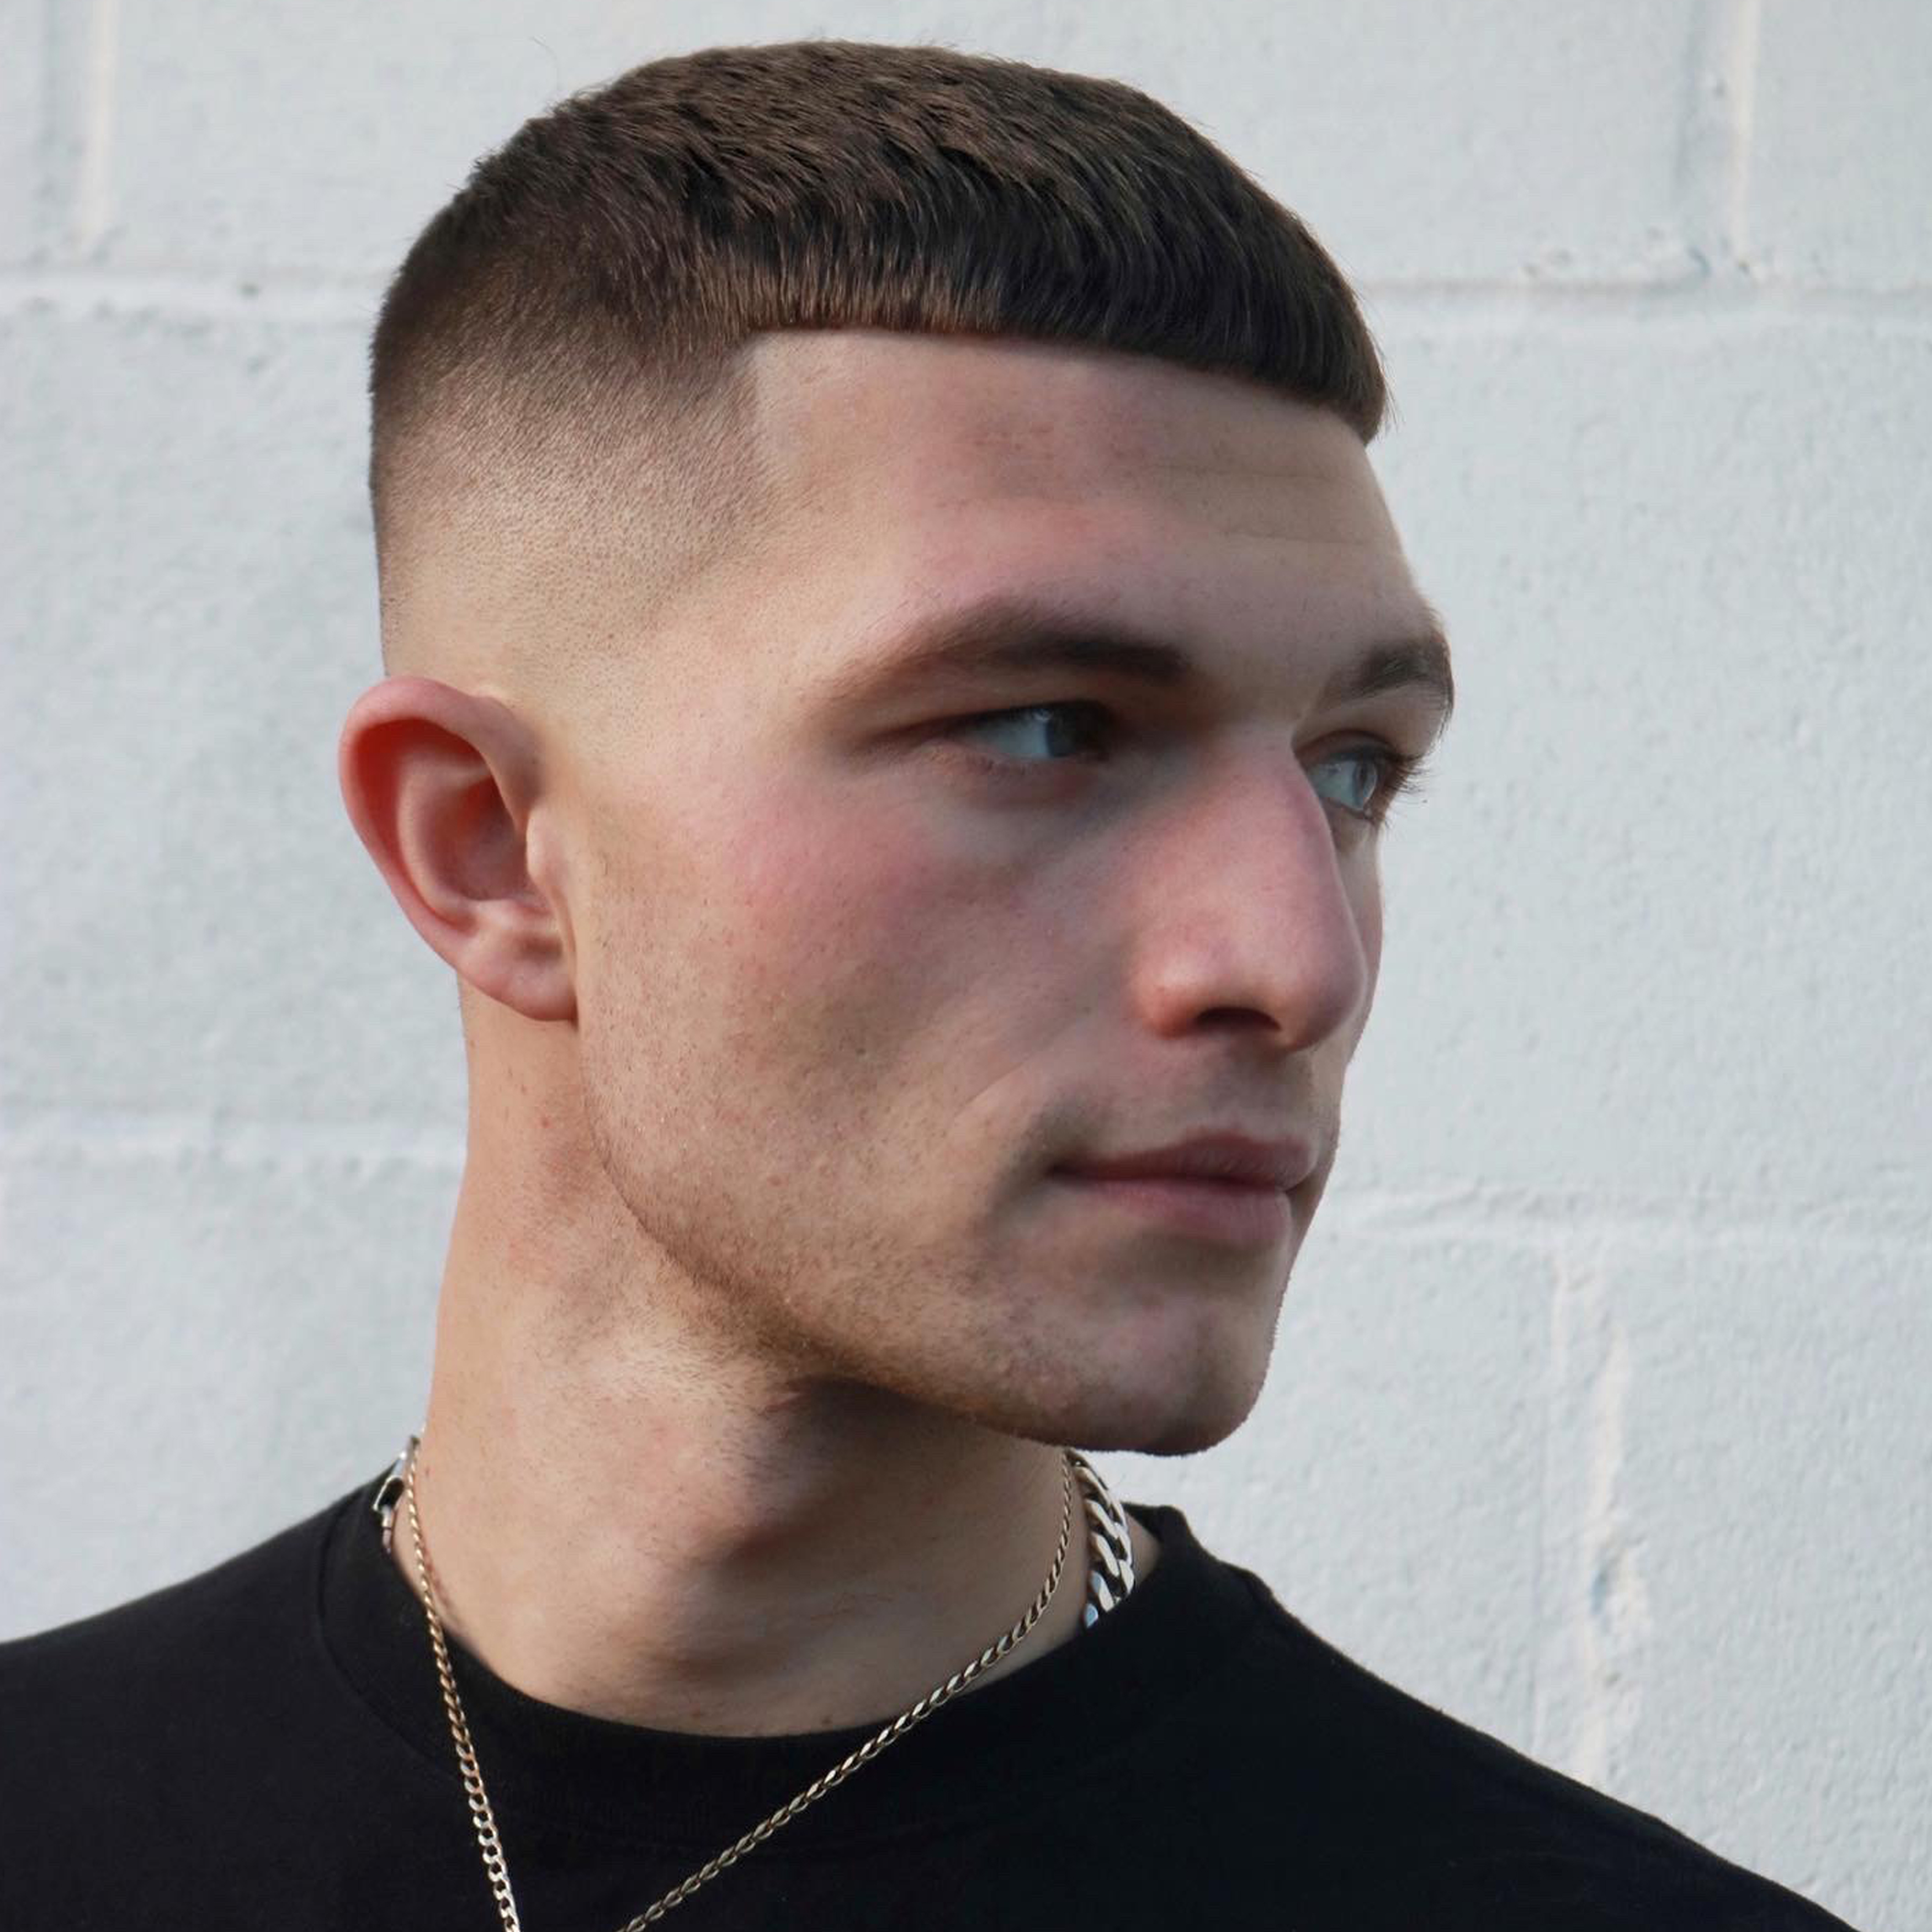 Caucasian male in a black t-shirt with a high fade created using Andis clippers and trimmers.